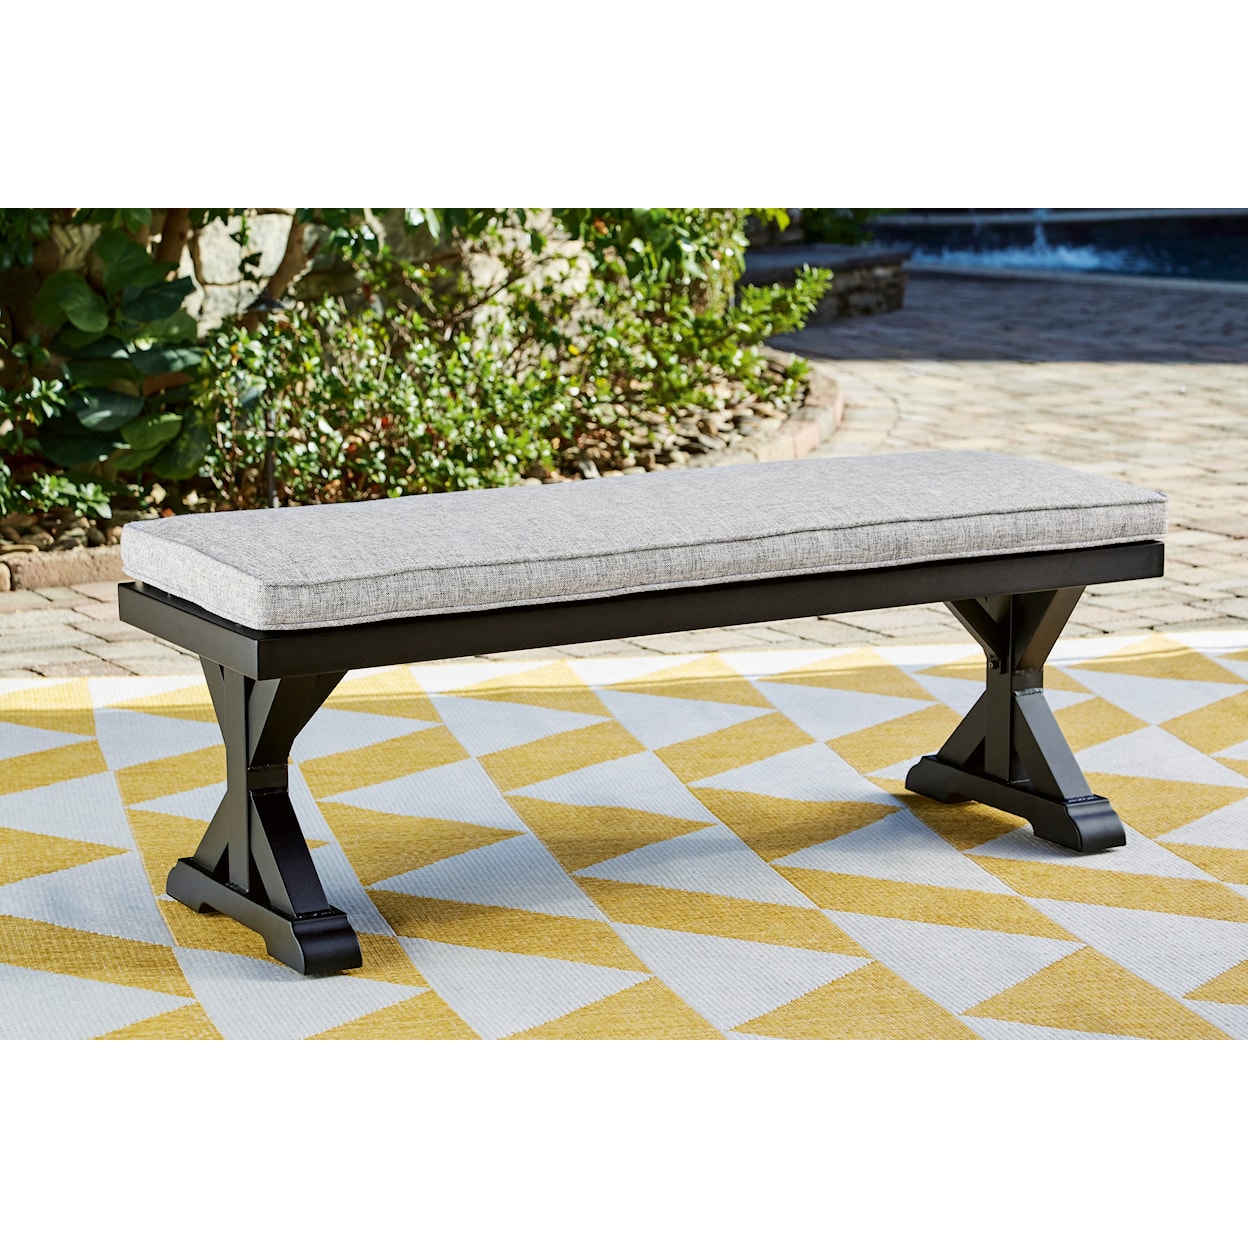 Ashley Furniture Signature Design Beachcroft Outdoor Bench with Cushion